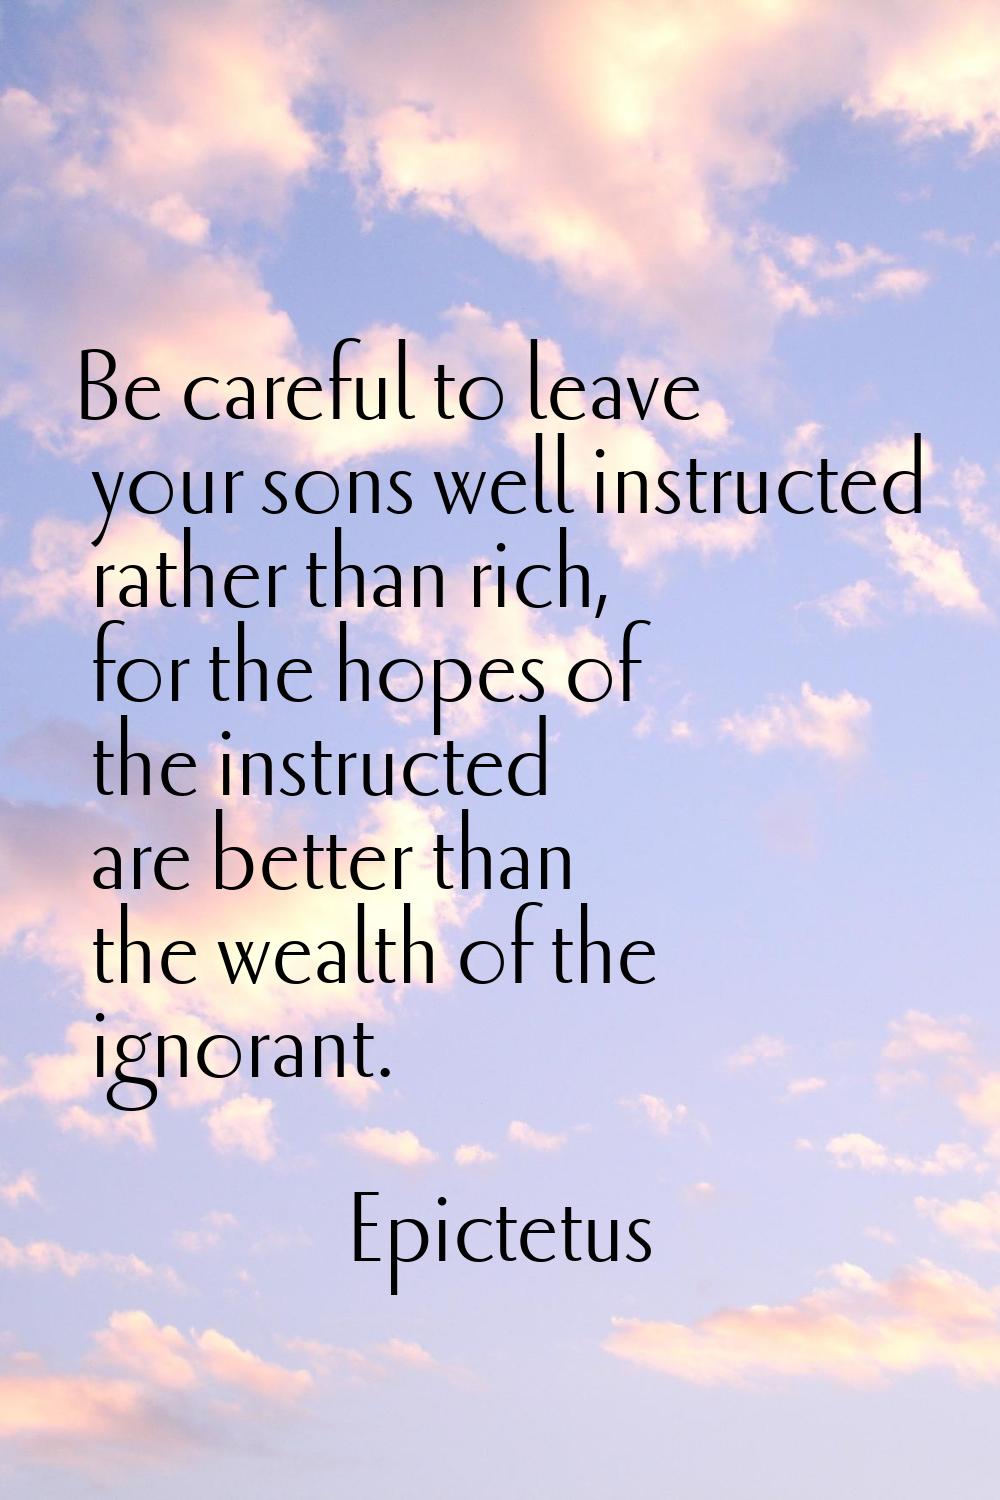 Be careful to leave your sons well instructed rather than rich, for the hopes of the instructed are